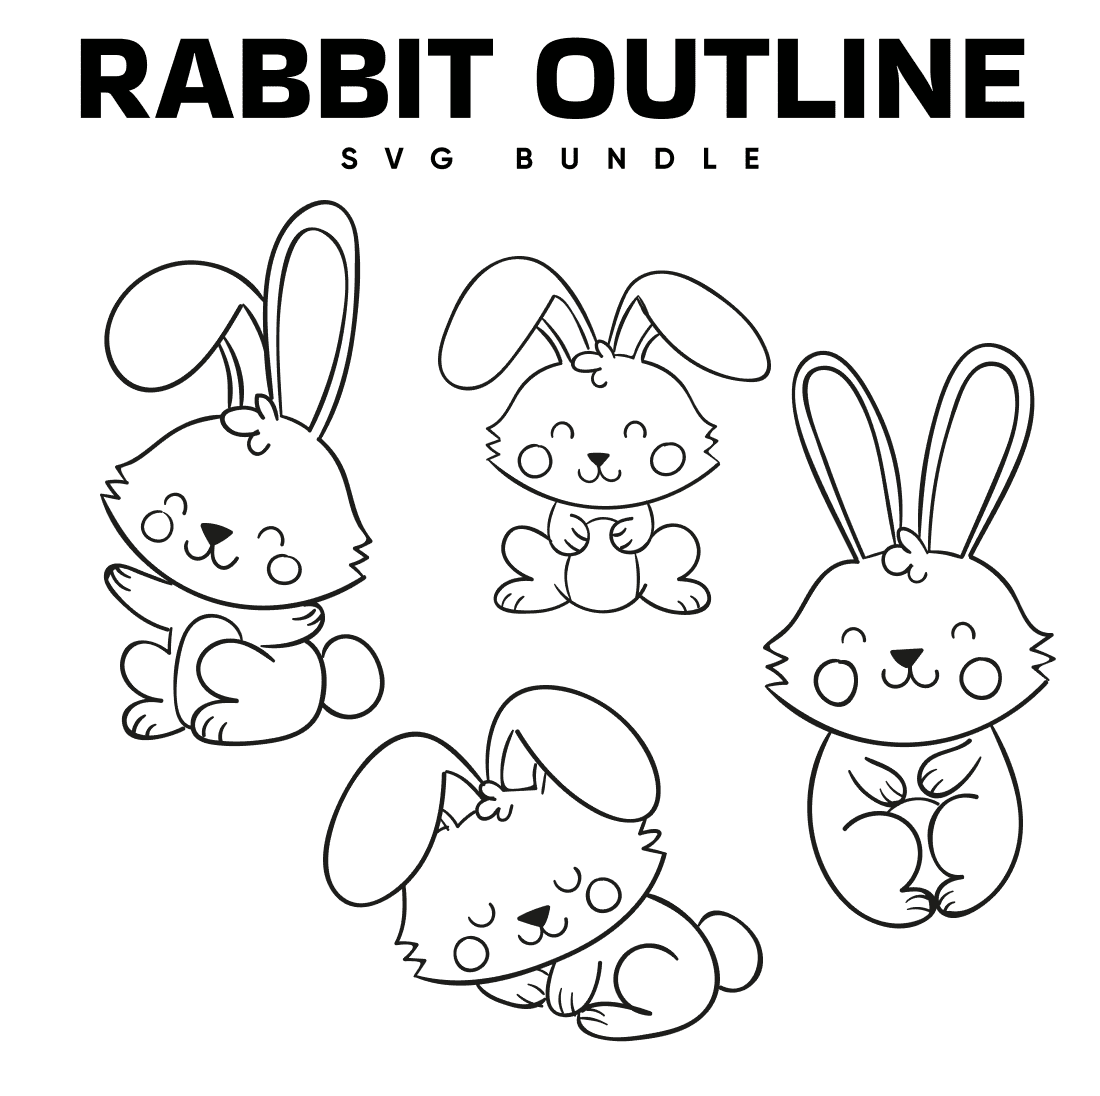 Rabbit outlines for a coloring book.